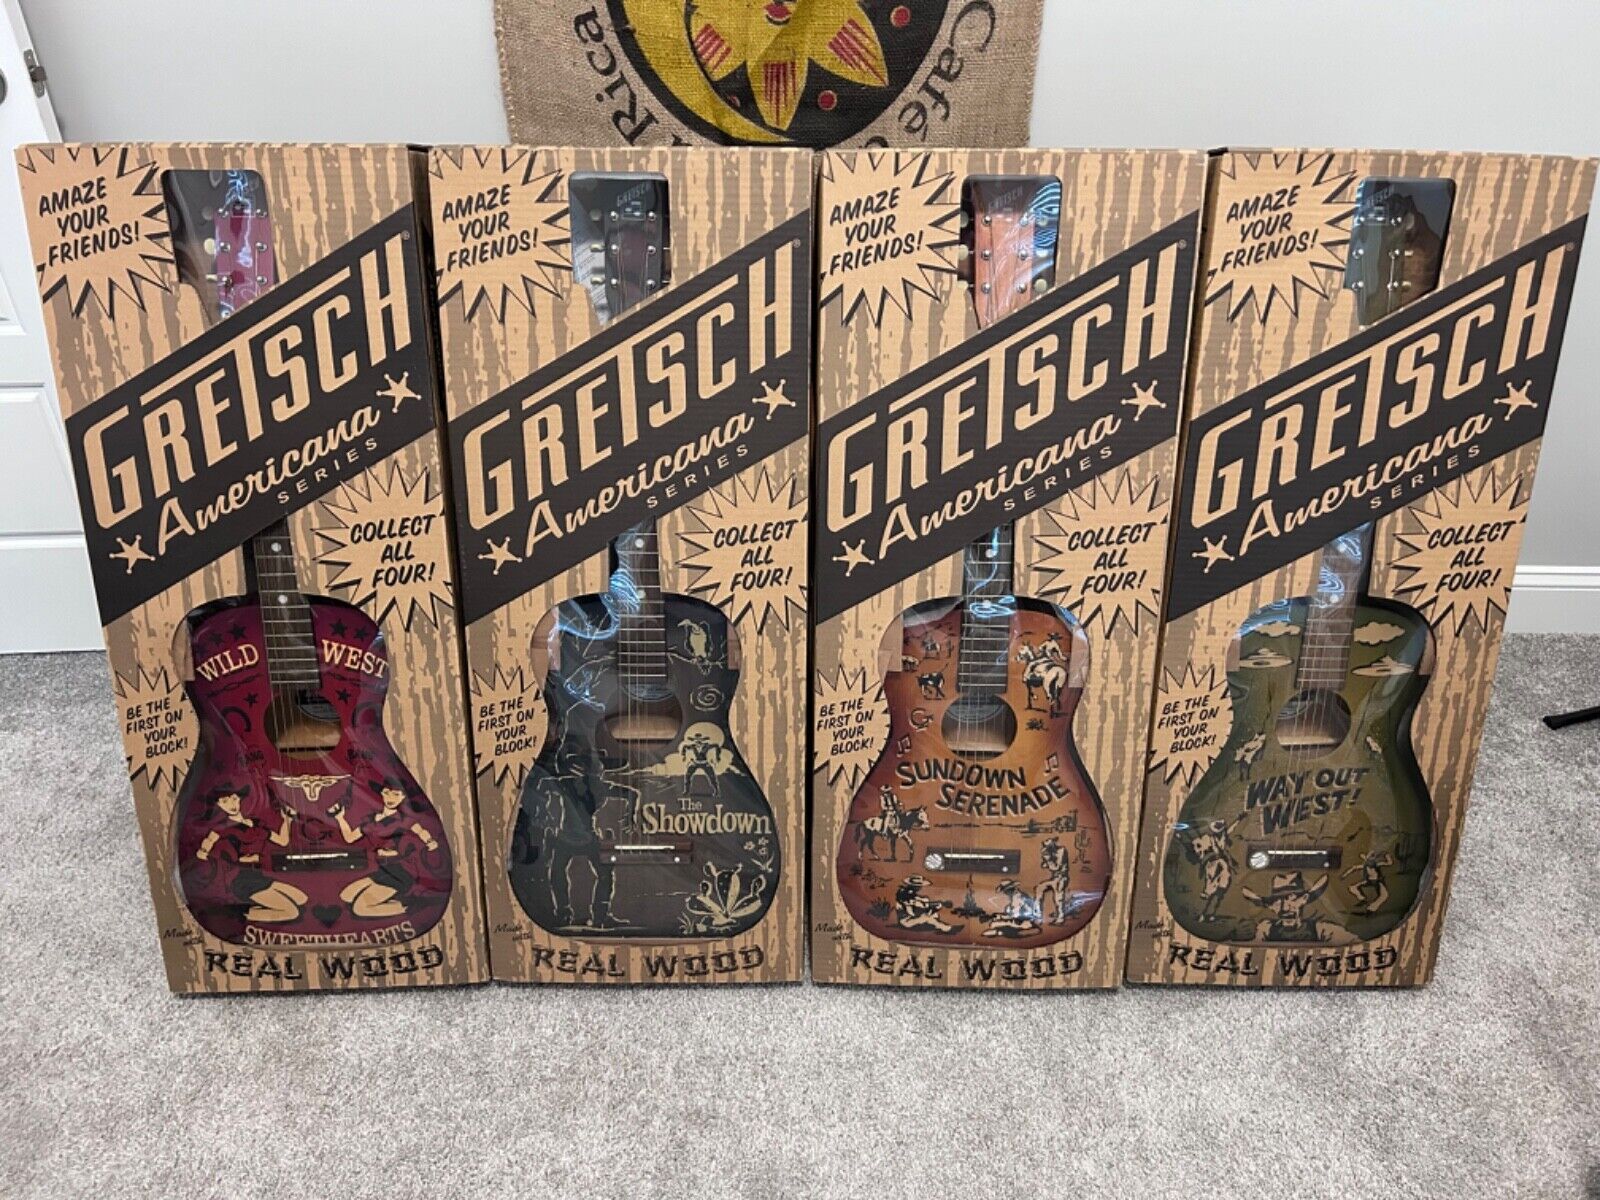 Gretsch Americana Acoustic Guitar Complete Set of 4